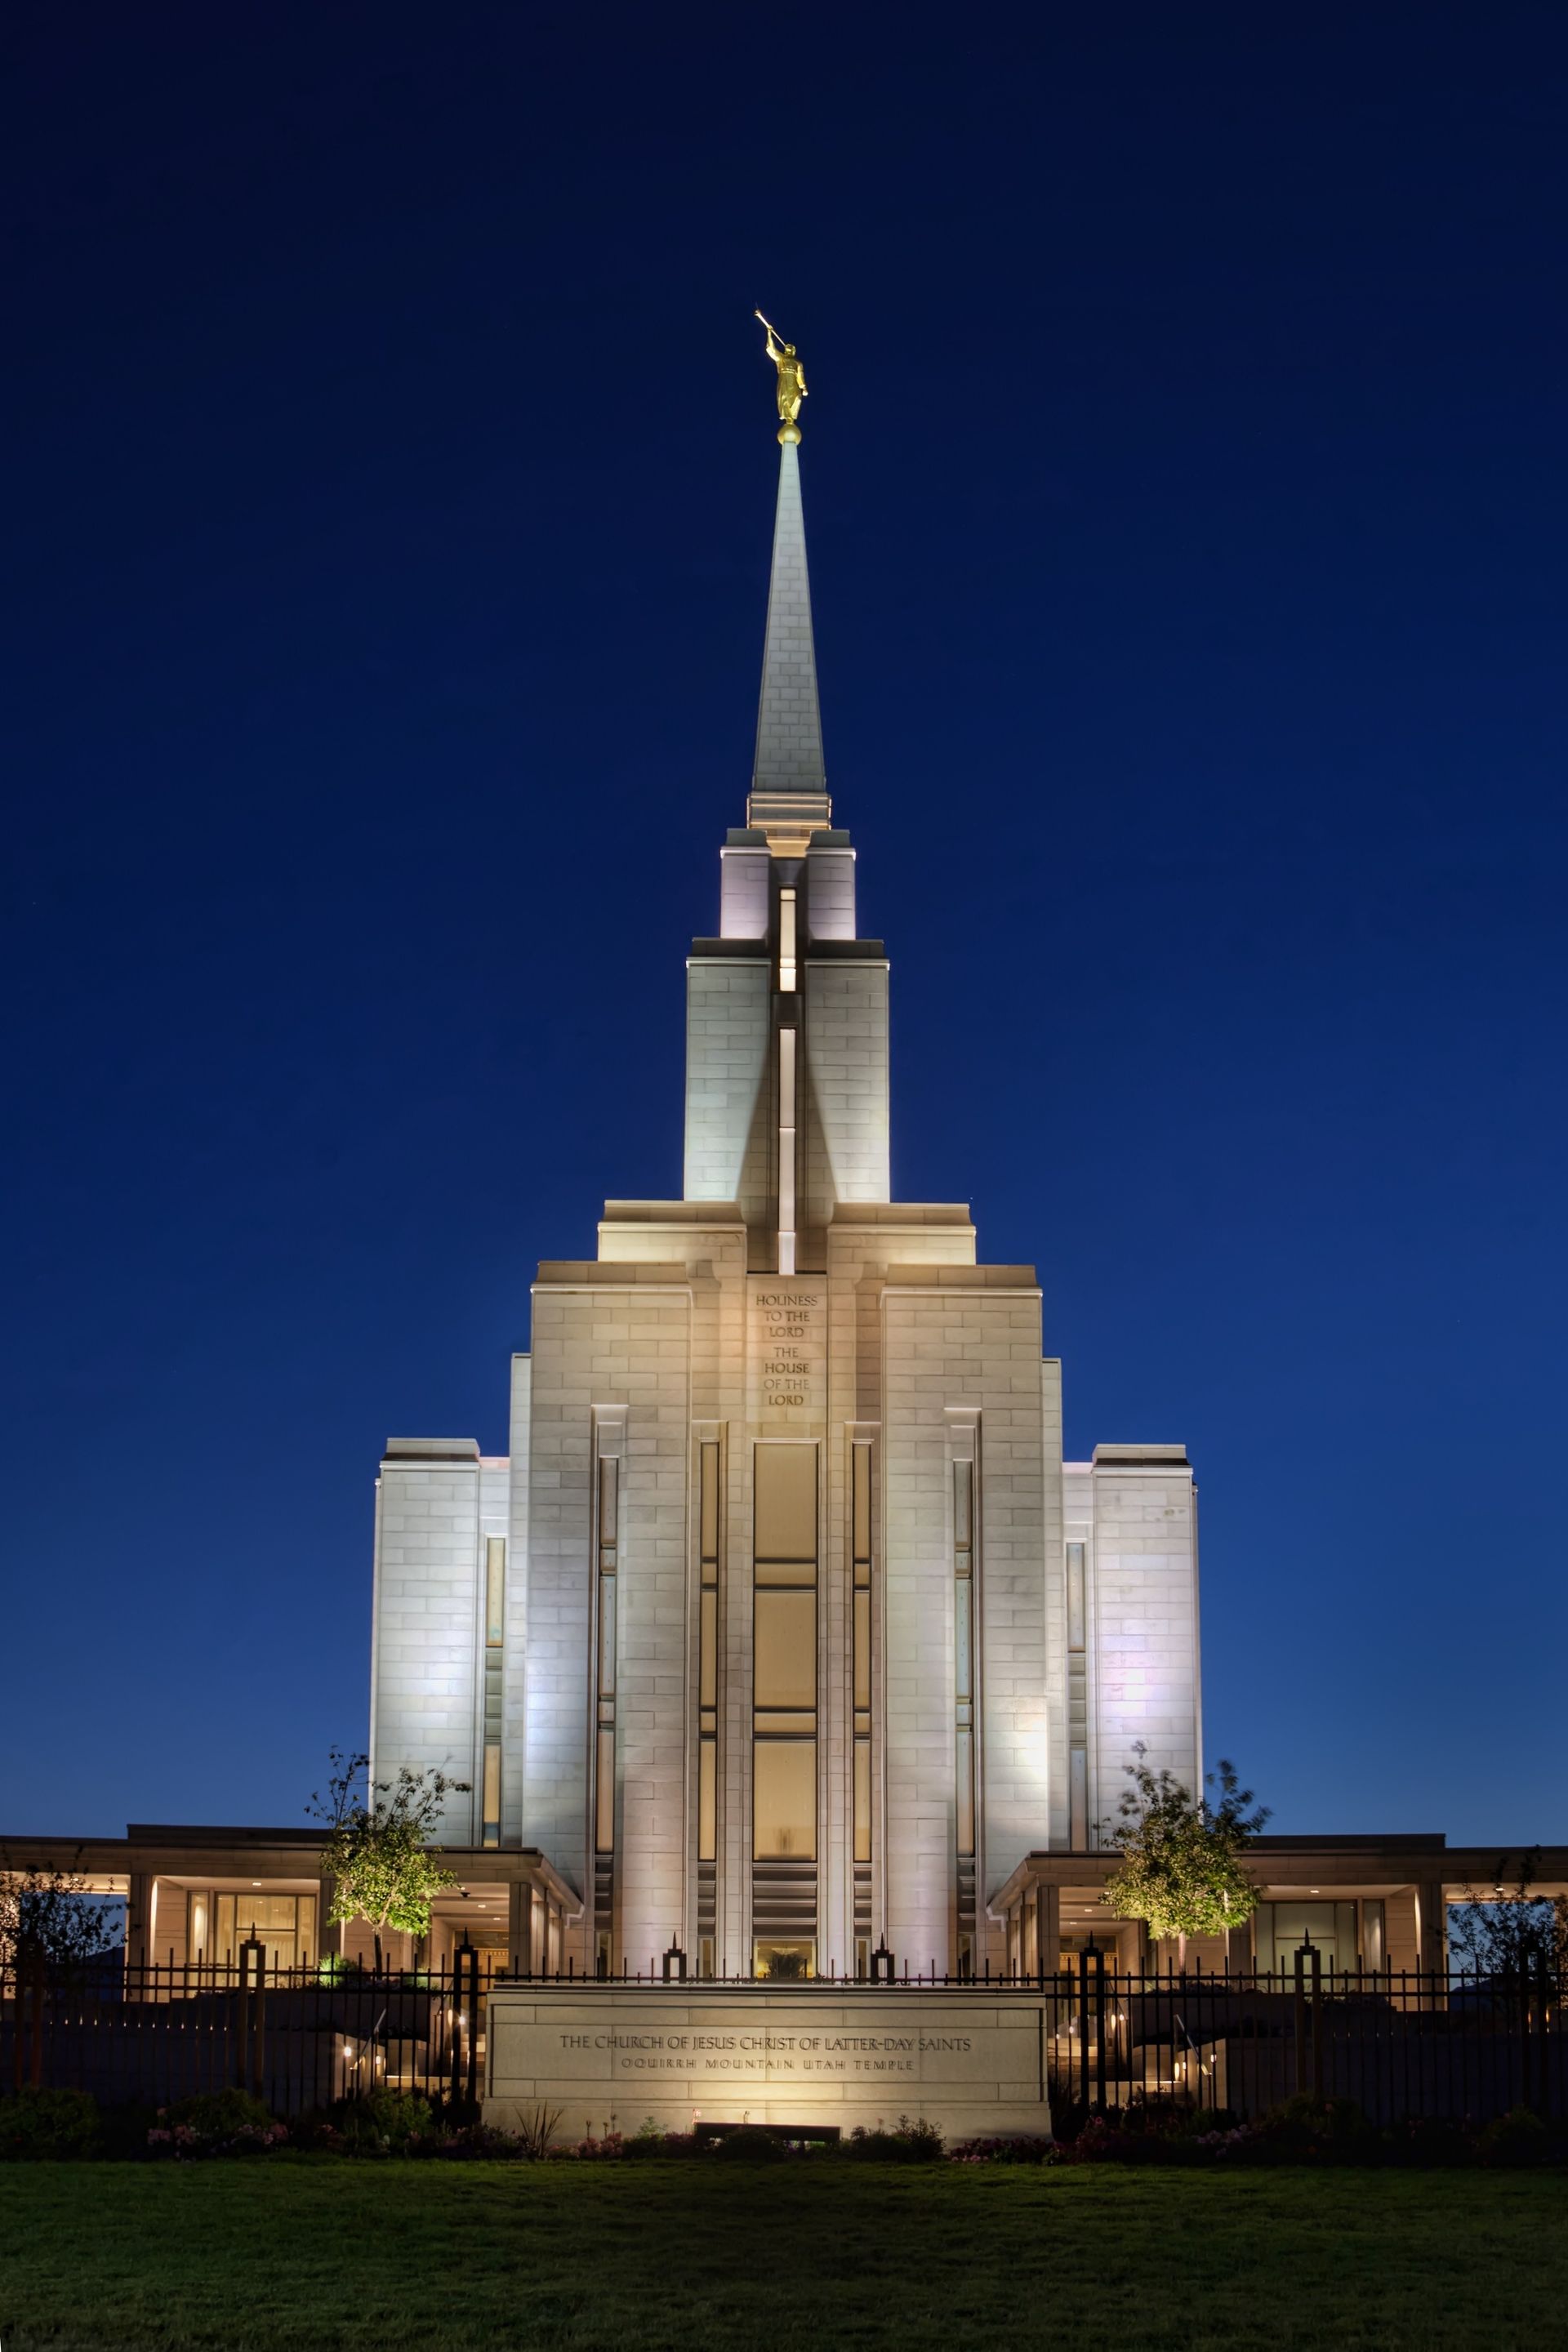 The Oquirrh Mountain Utah Temple in the evening, including the name sign and entrance.